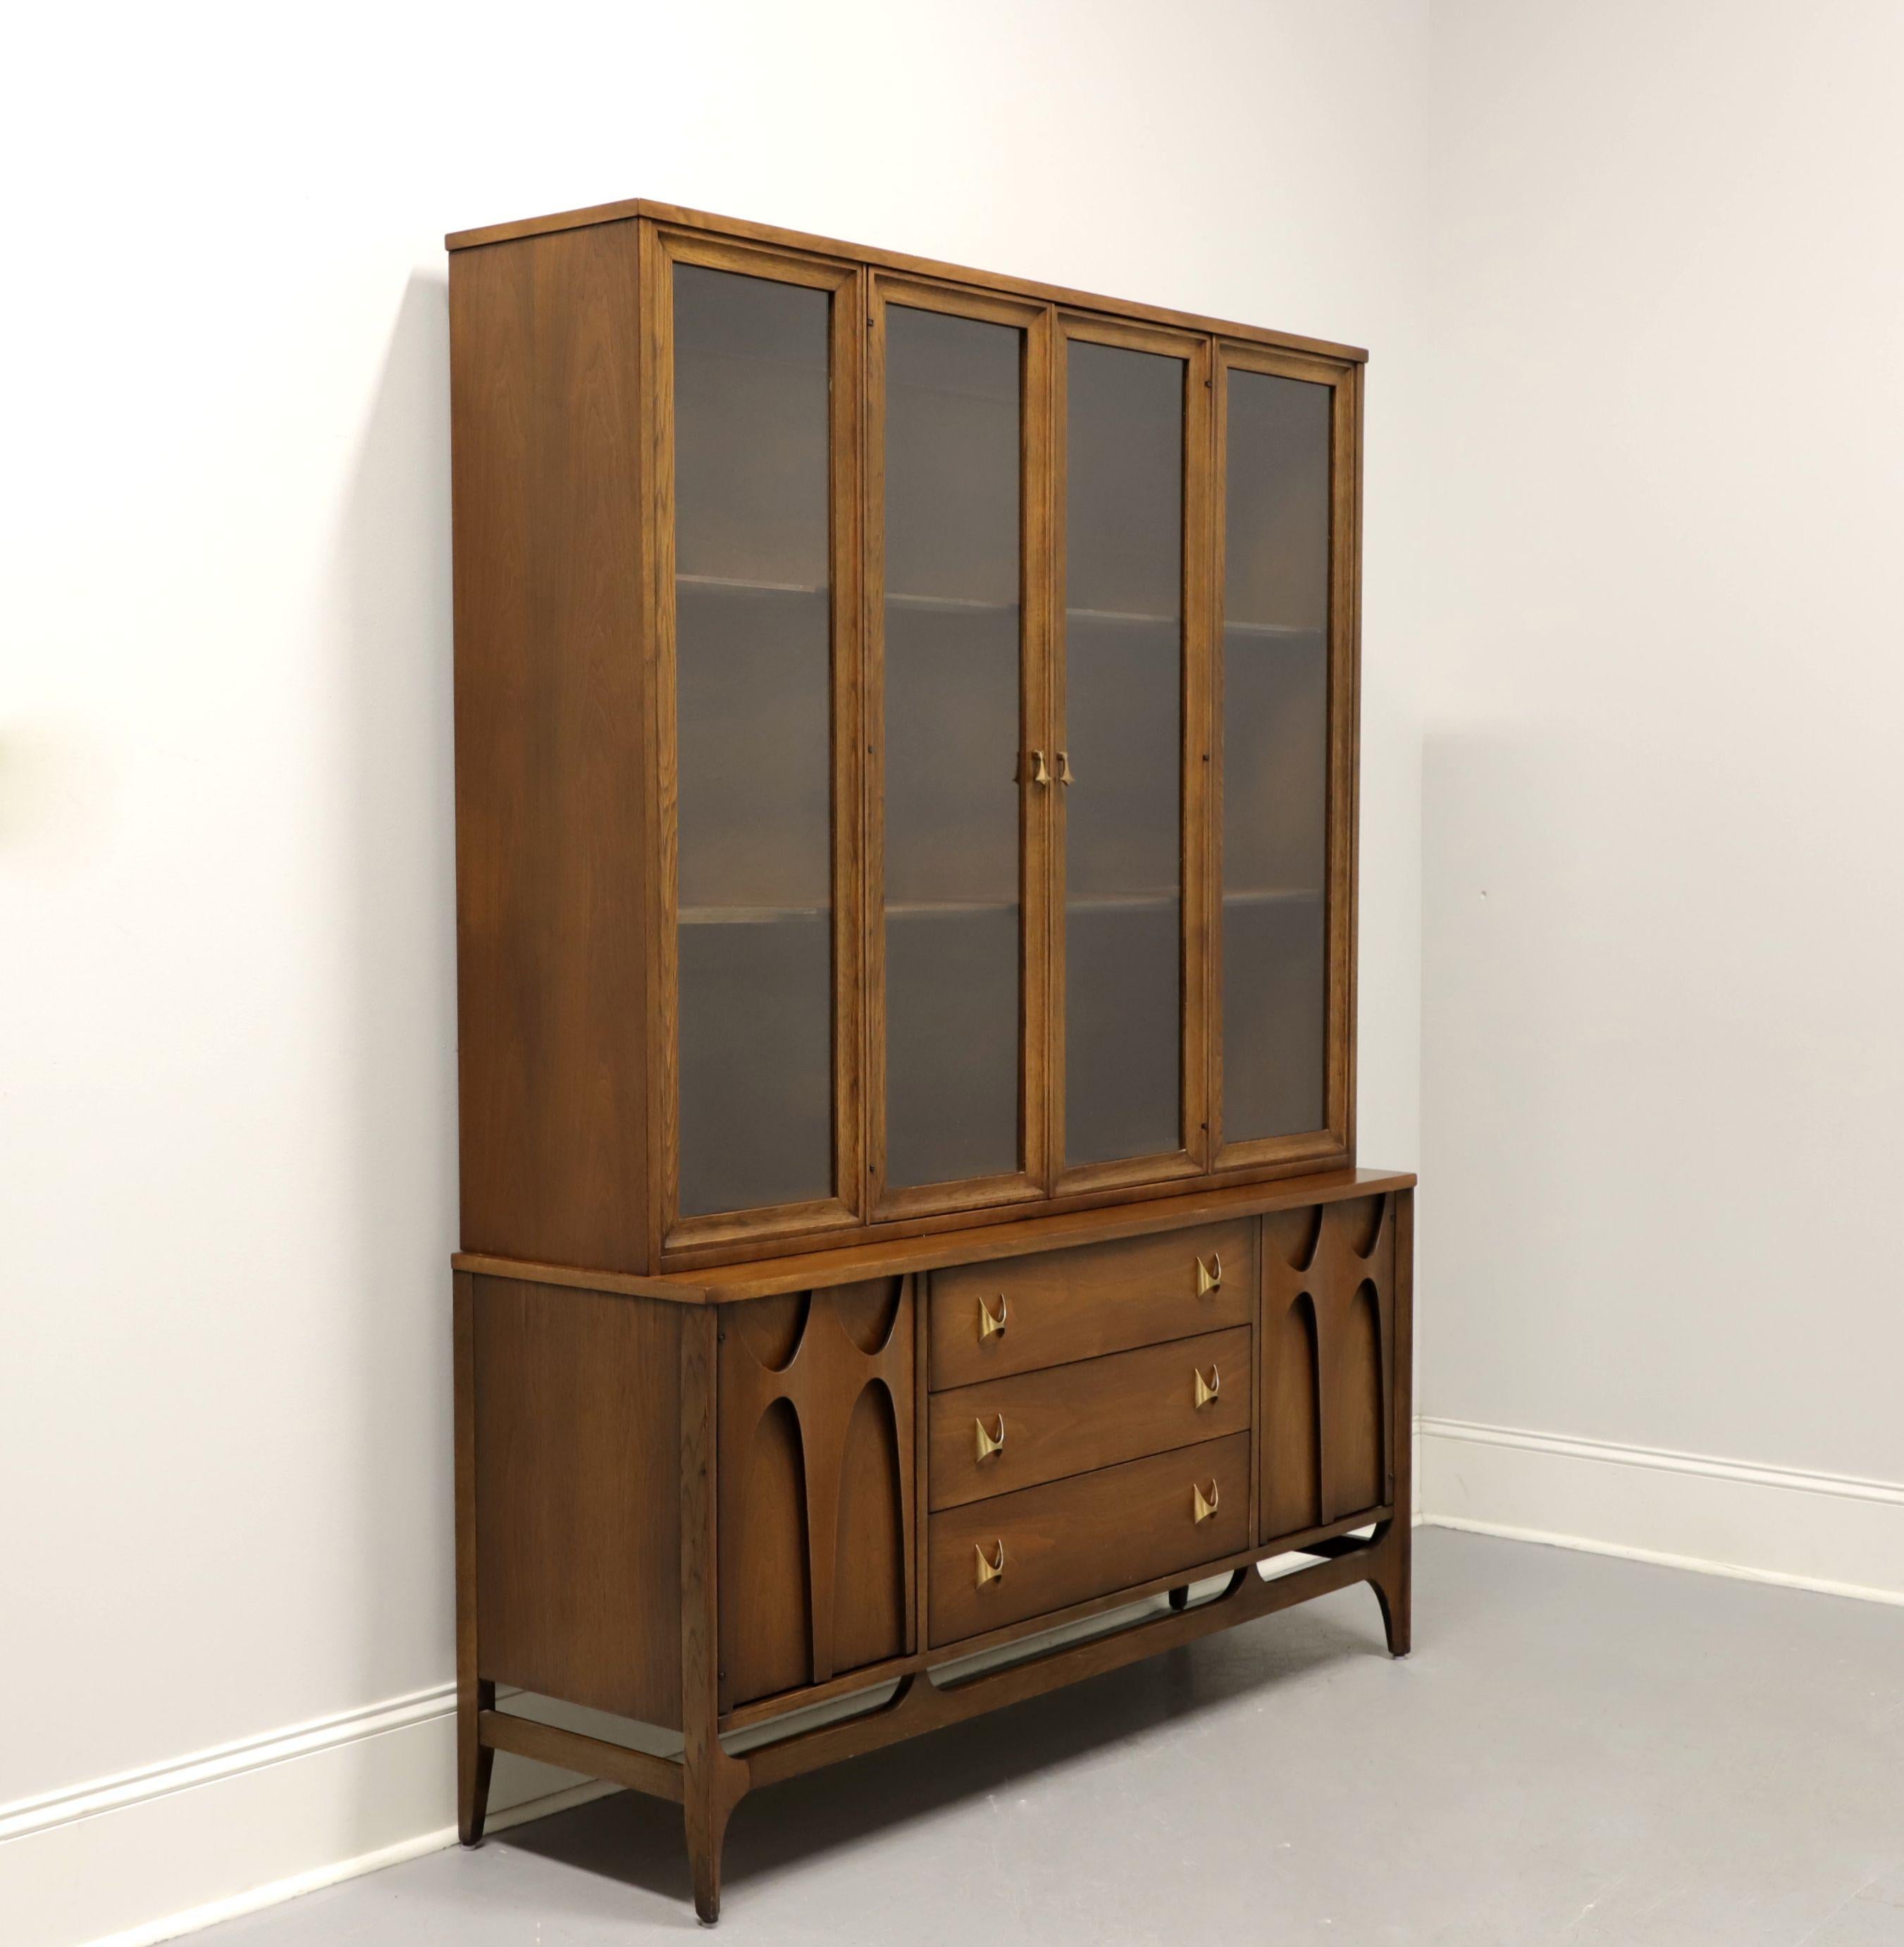 A Mid Century Modern china cabinet by Broyhill Premiere, from their Brasilia Collection. Walnut with brass hardware. Upper cabinet features two fixed plate grooved wood shelves behind dual glass doors with flanking glass panels. Lower cabinet